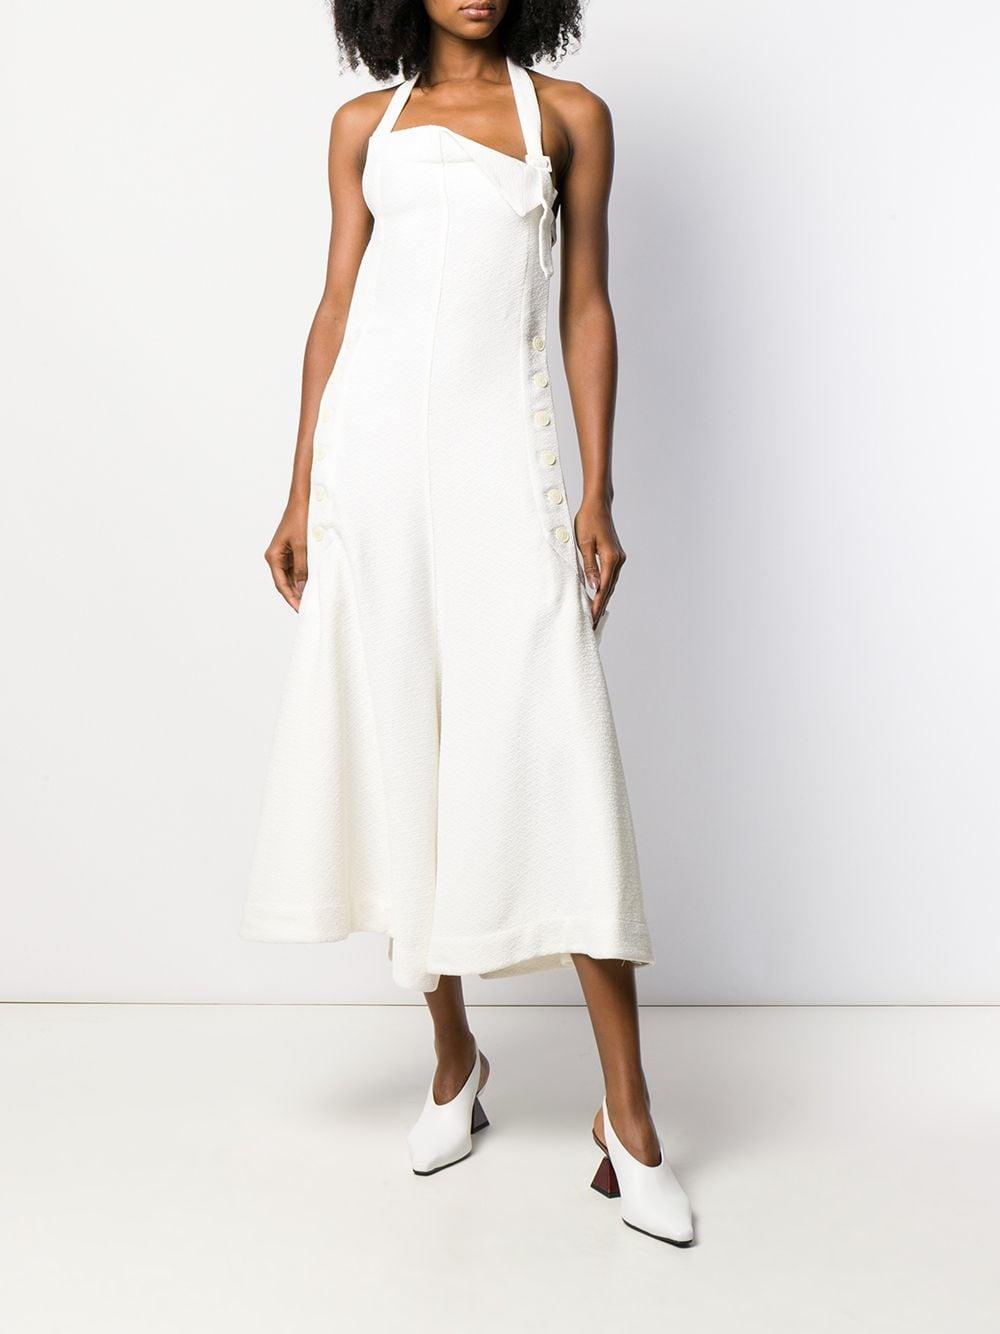 Jacquemus Wool Apron Dress in White - Save 40% - Lyst